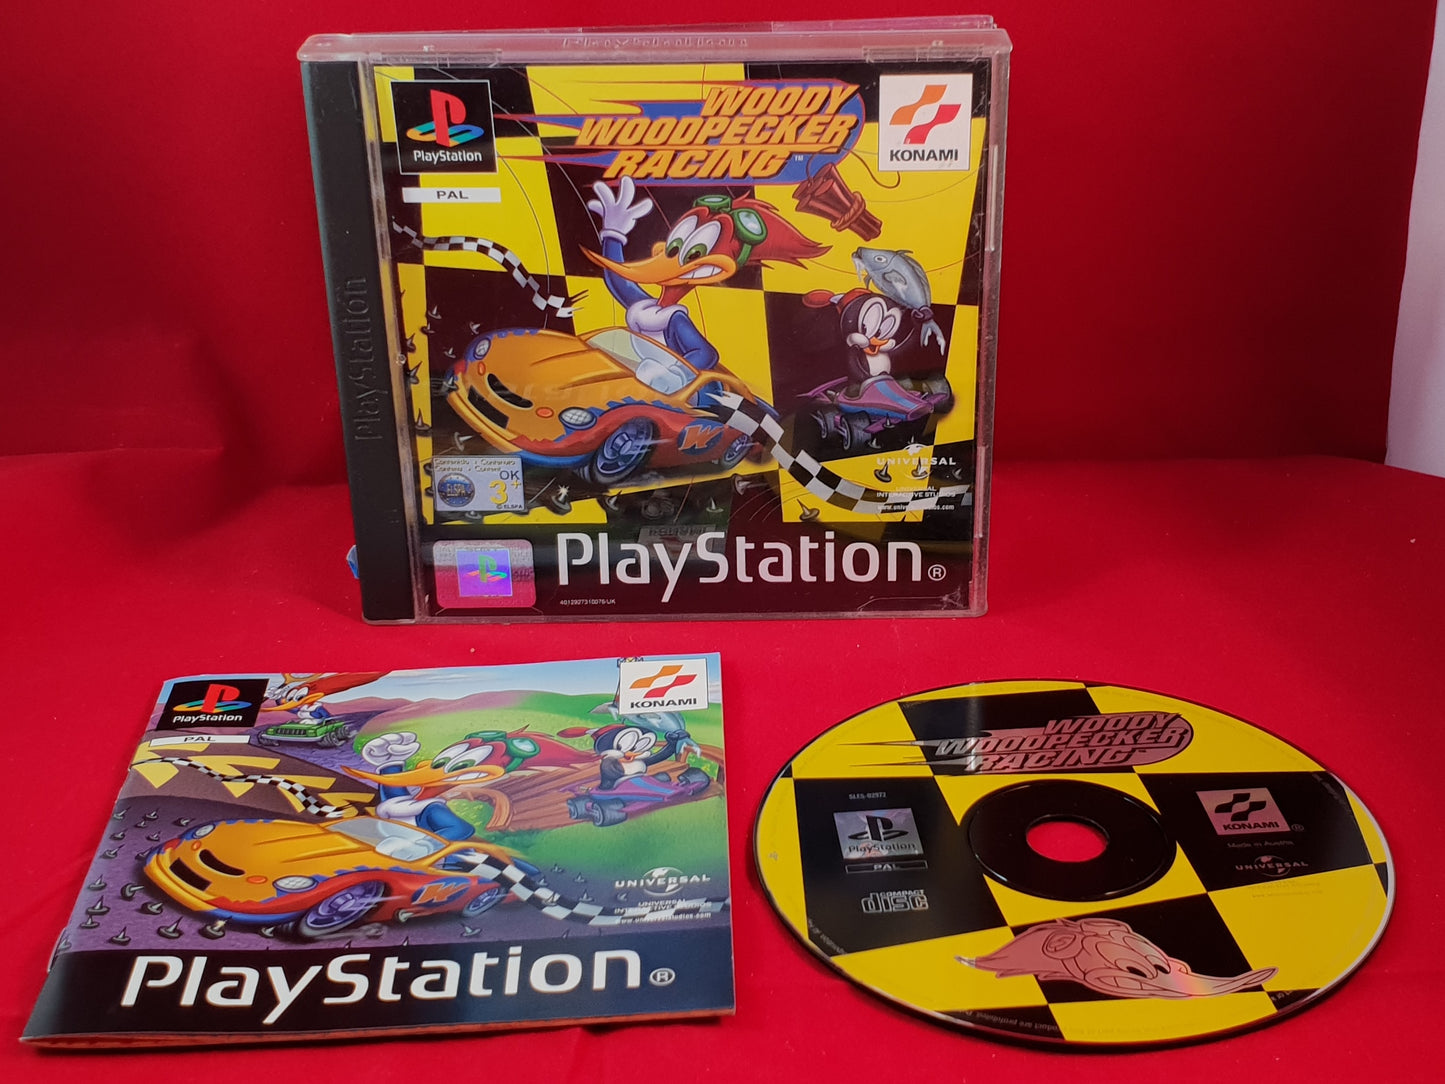 Woody Woodpecker Racing Sony Playstation 1 (PS1) Game